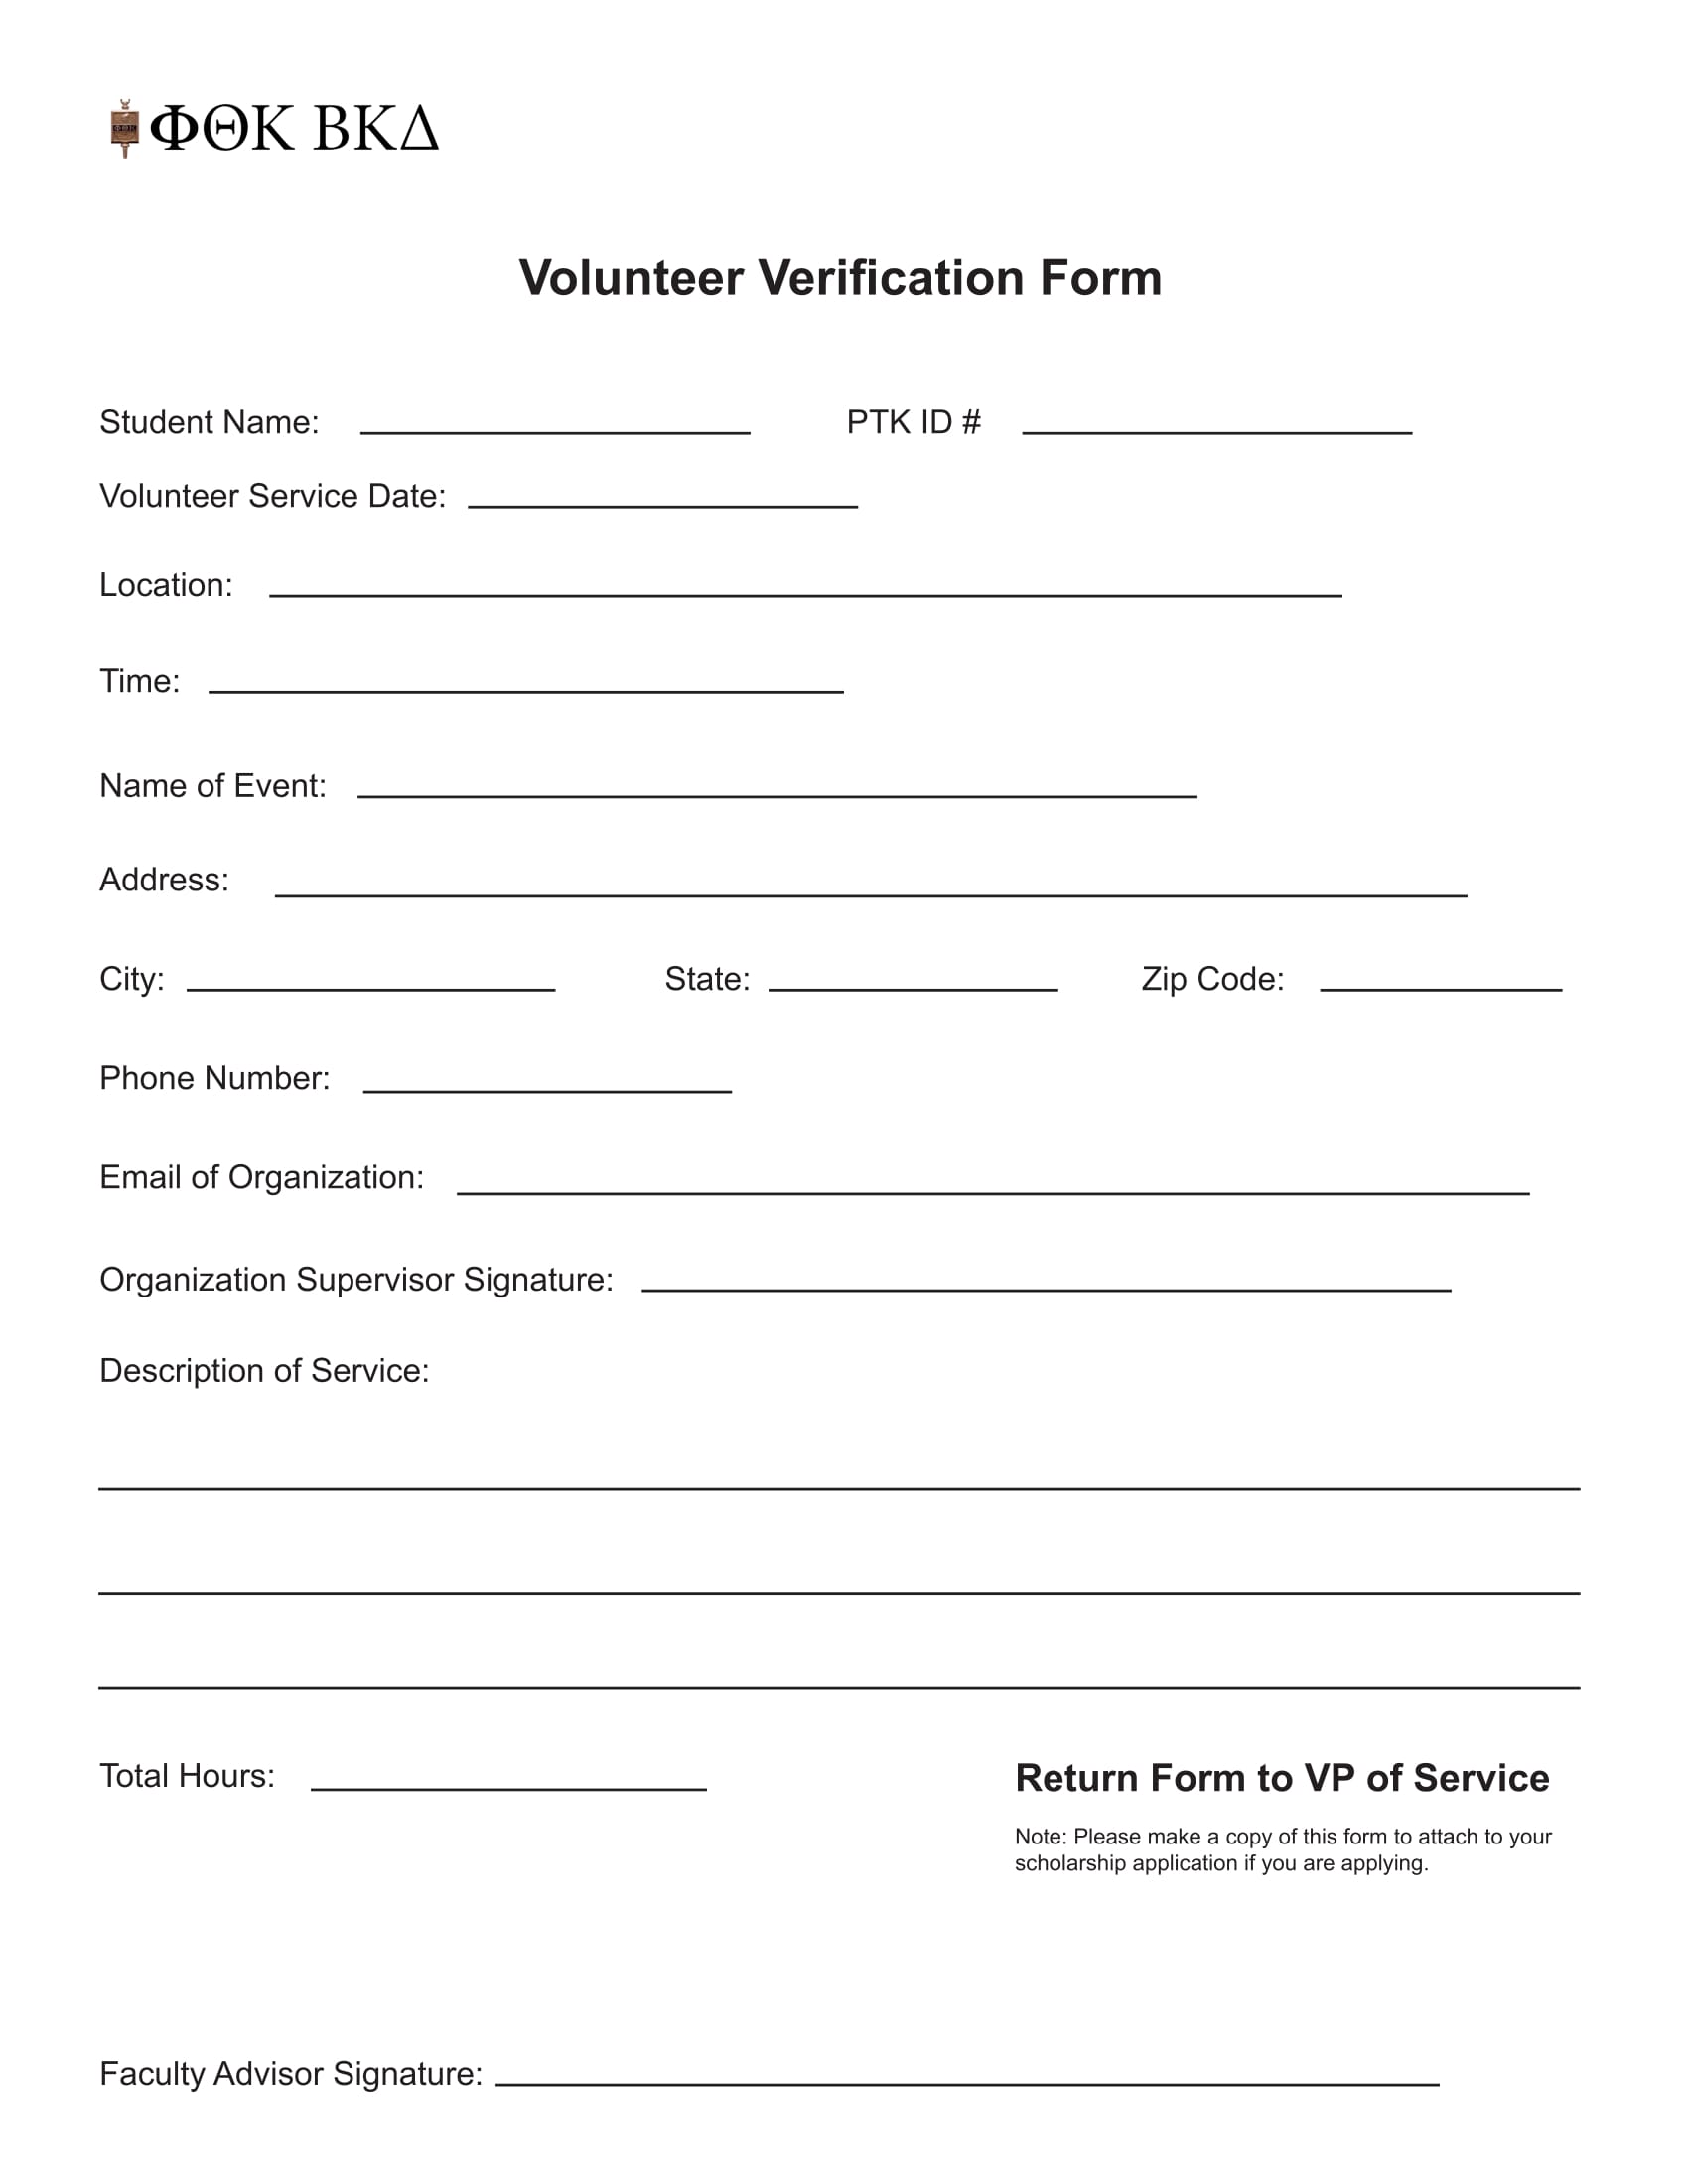 what-is-a-volunteer-verification-form-definition-types-importance